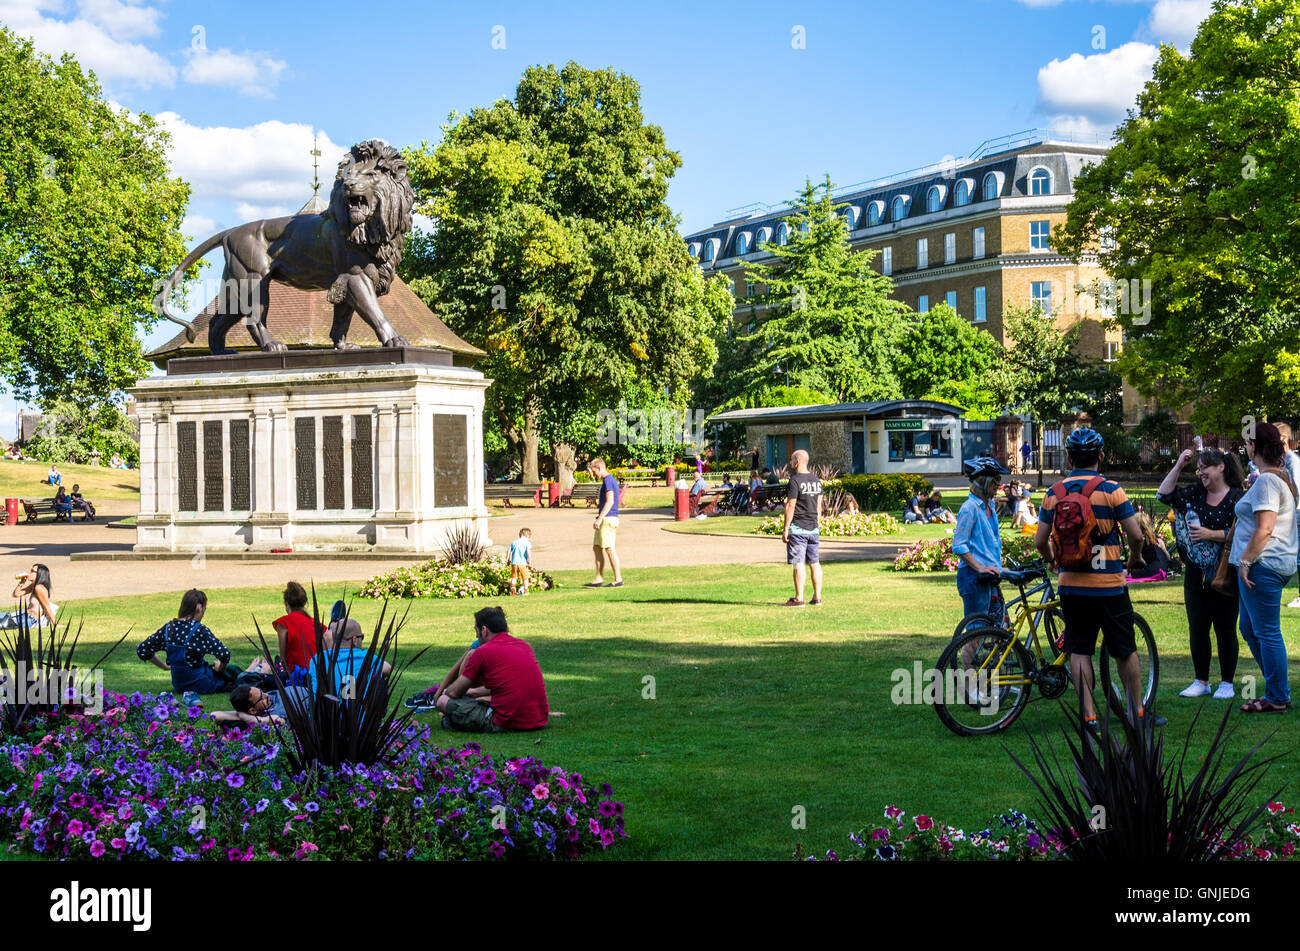 A view looking across Forbury Gardens in Reading, UK which features the Maiwand Lion at it's centre. Stock Photo